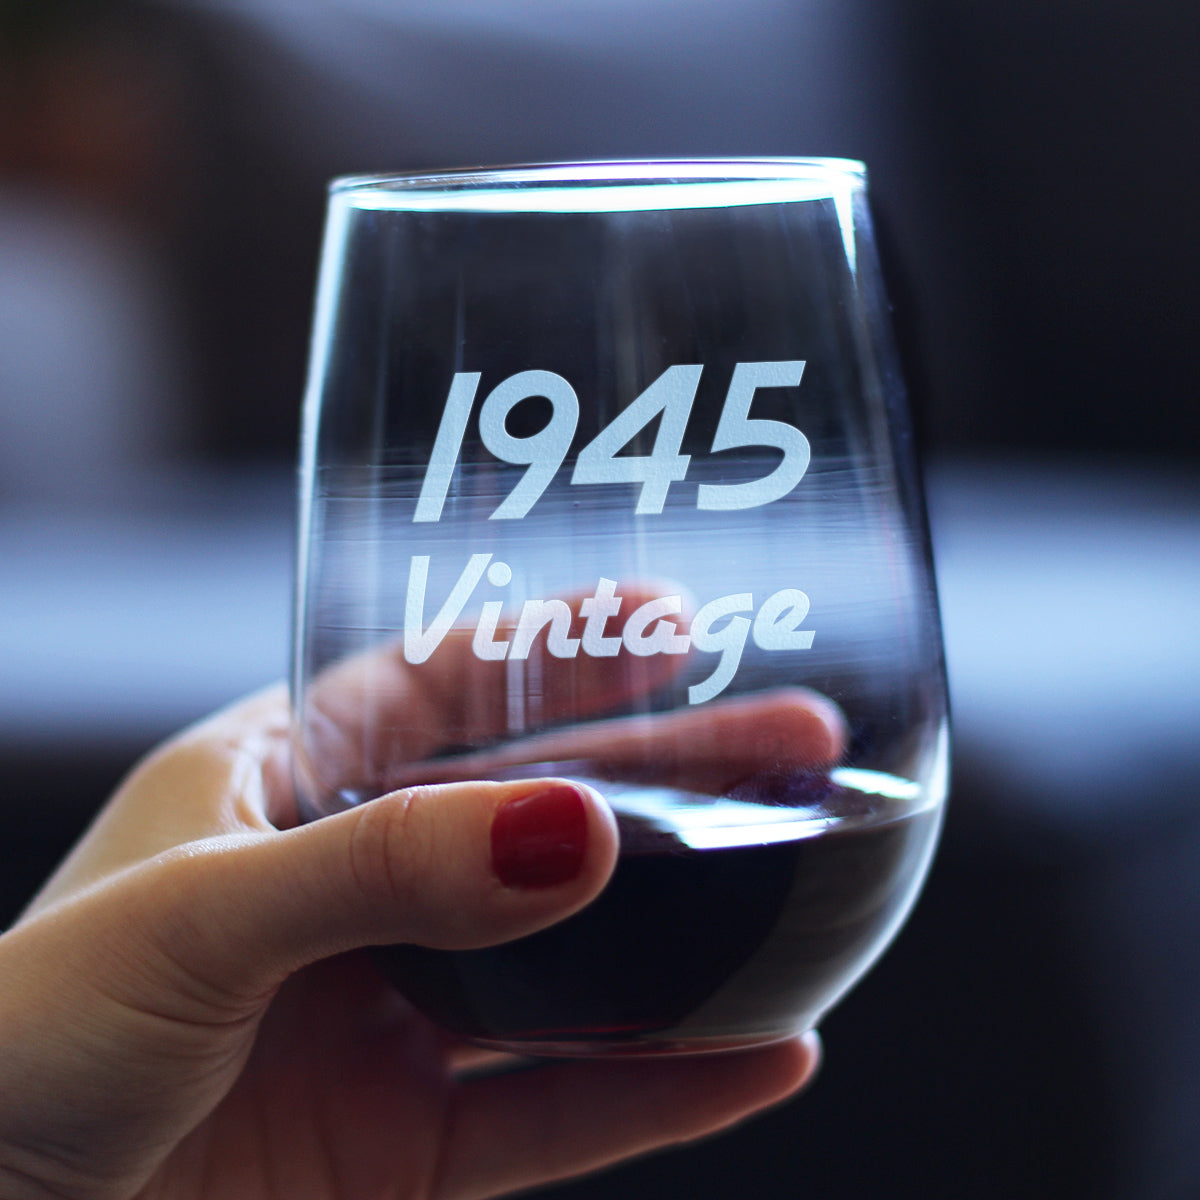 Vintage 1945 - 79th Birthday Stemless Wine Glass Gifts for Women &amp; Men Turning 79 - Bday Party Decor - Large Glasses